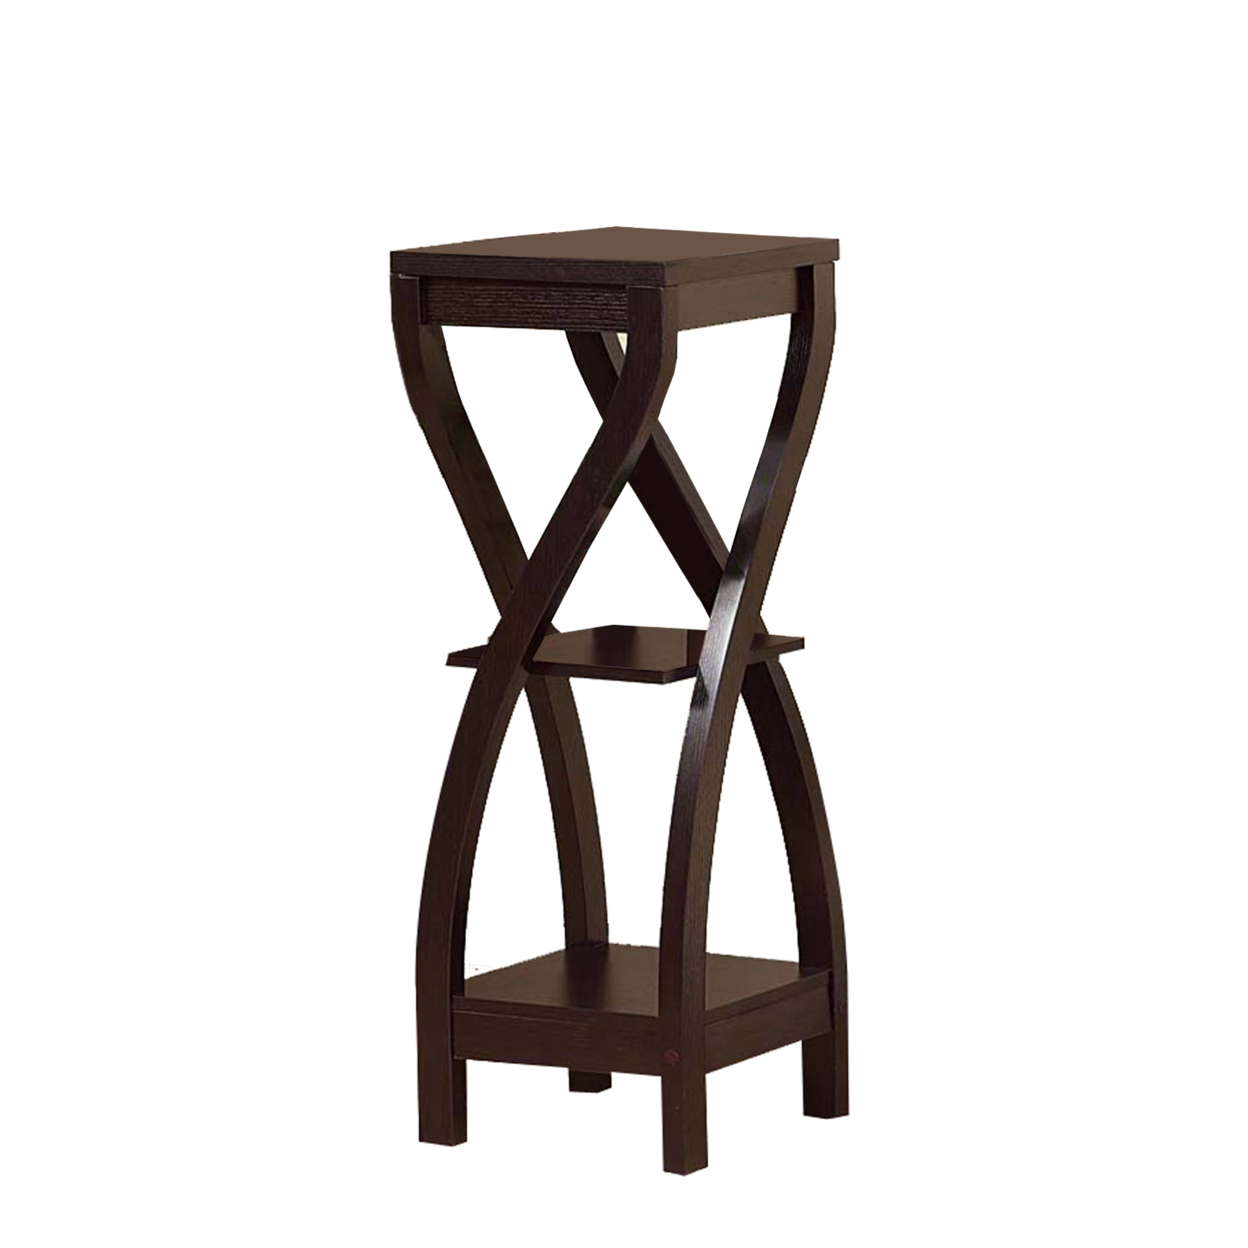 Square Top Wooden Plant Stand With Curved Legs And Shelves, Large, Dark Brown- Saltoro Sherpi